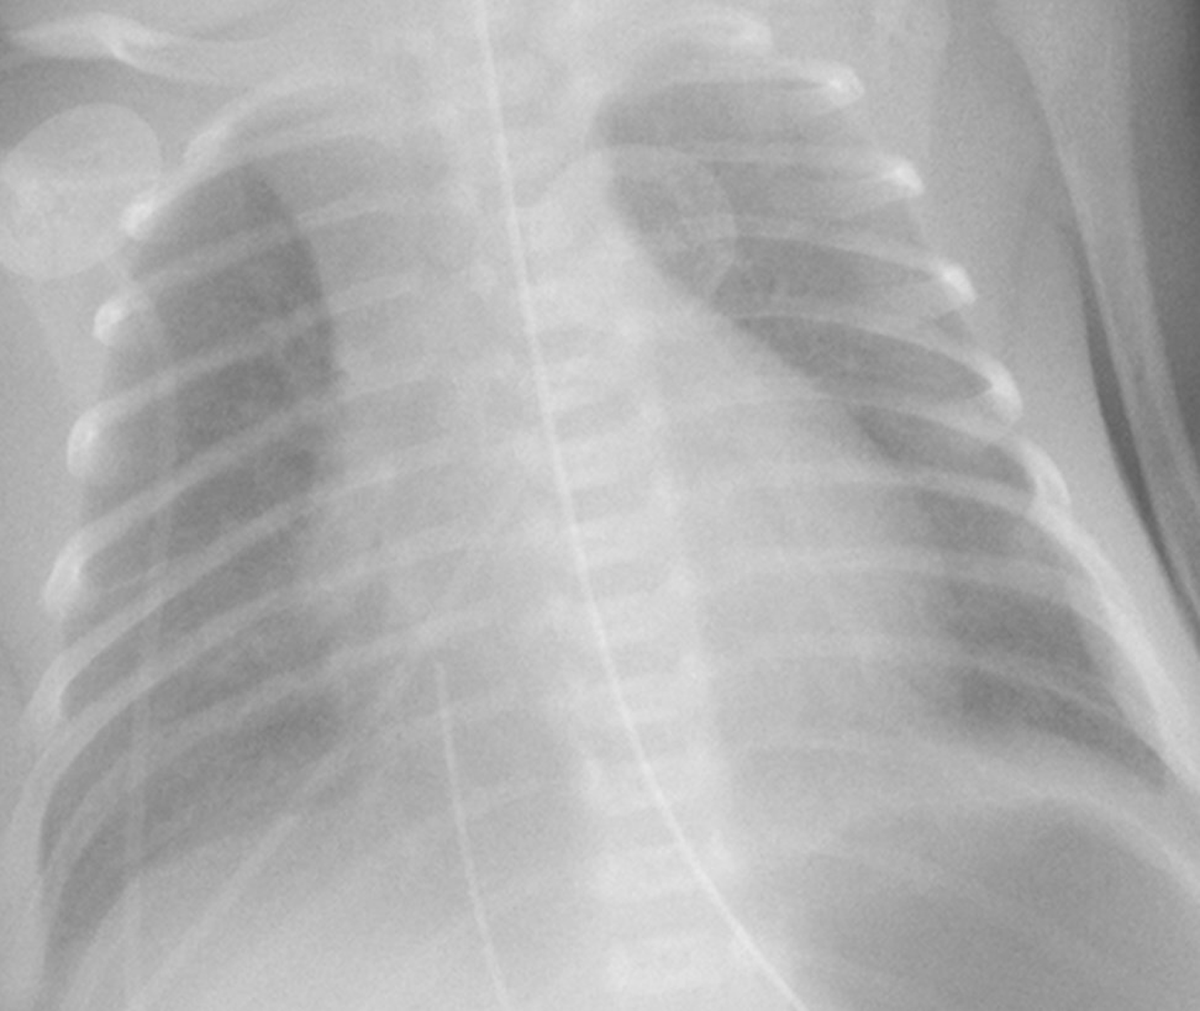 Retrocardiac Lucency in Neonates: Air Trapped in the Pulmonary